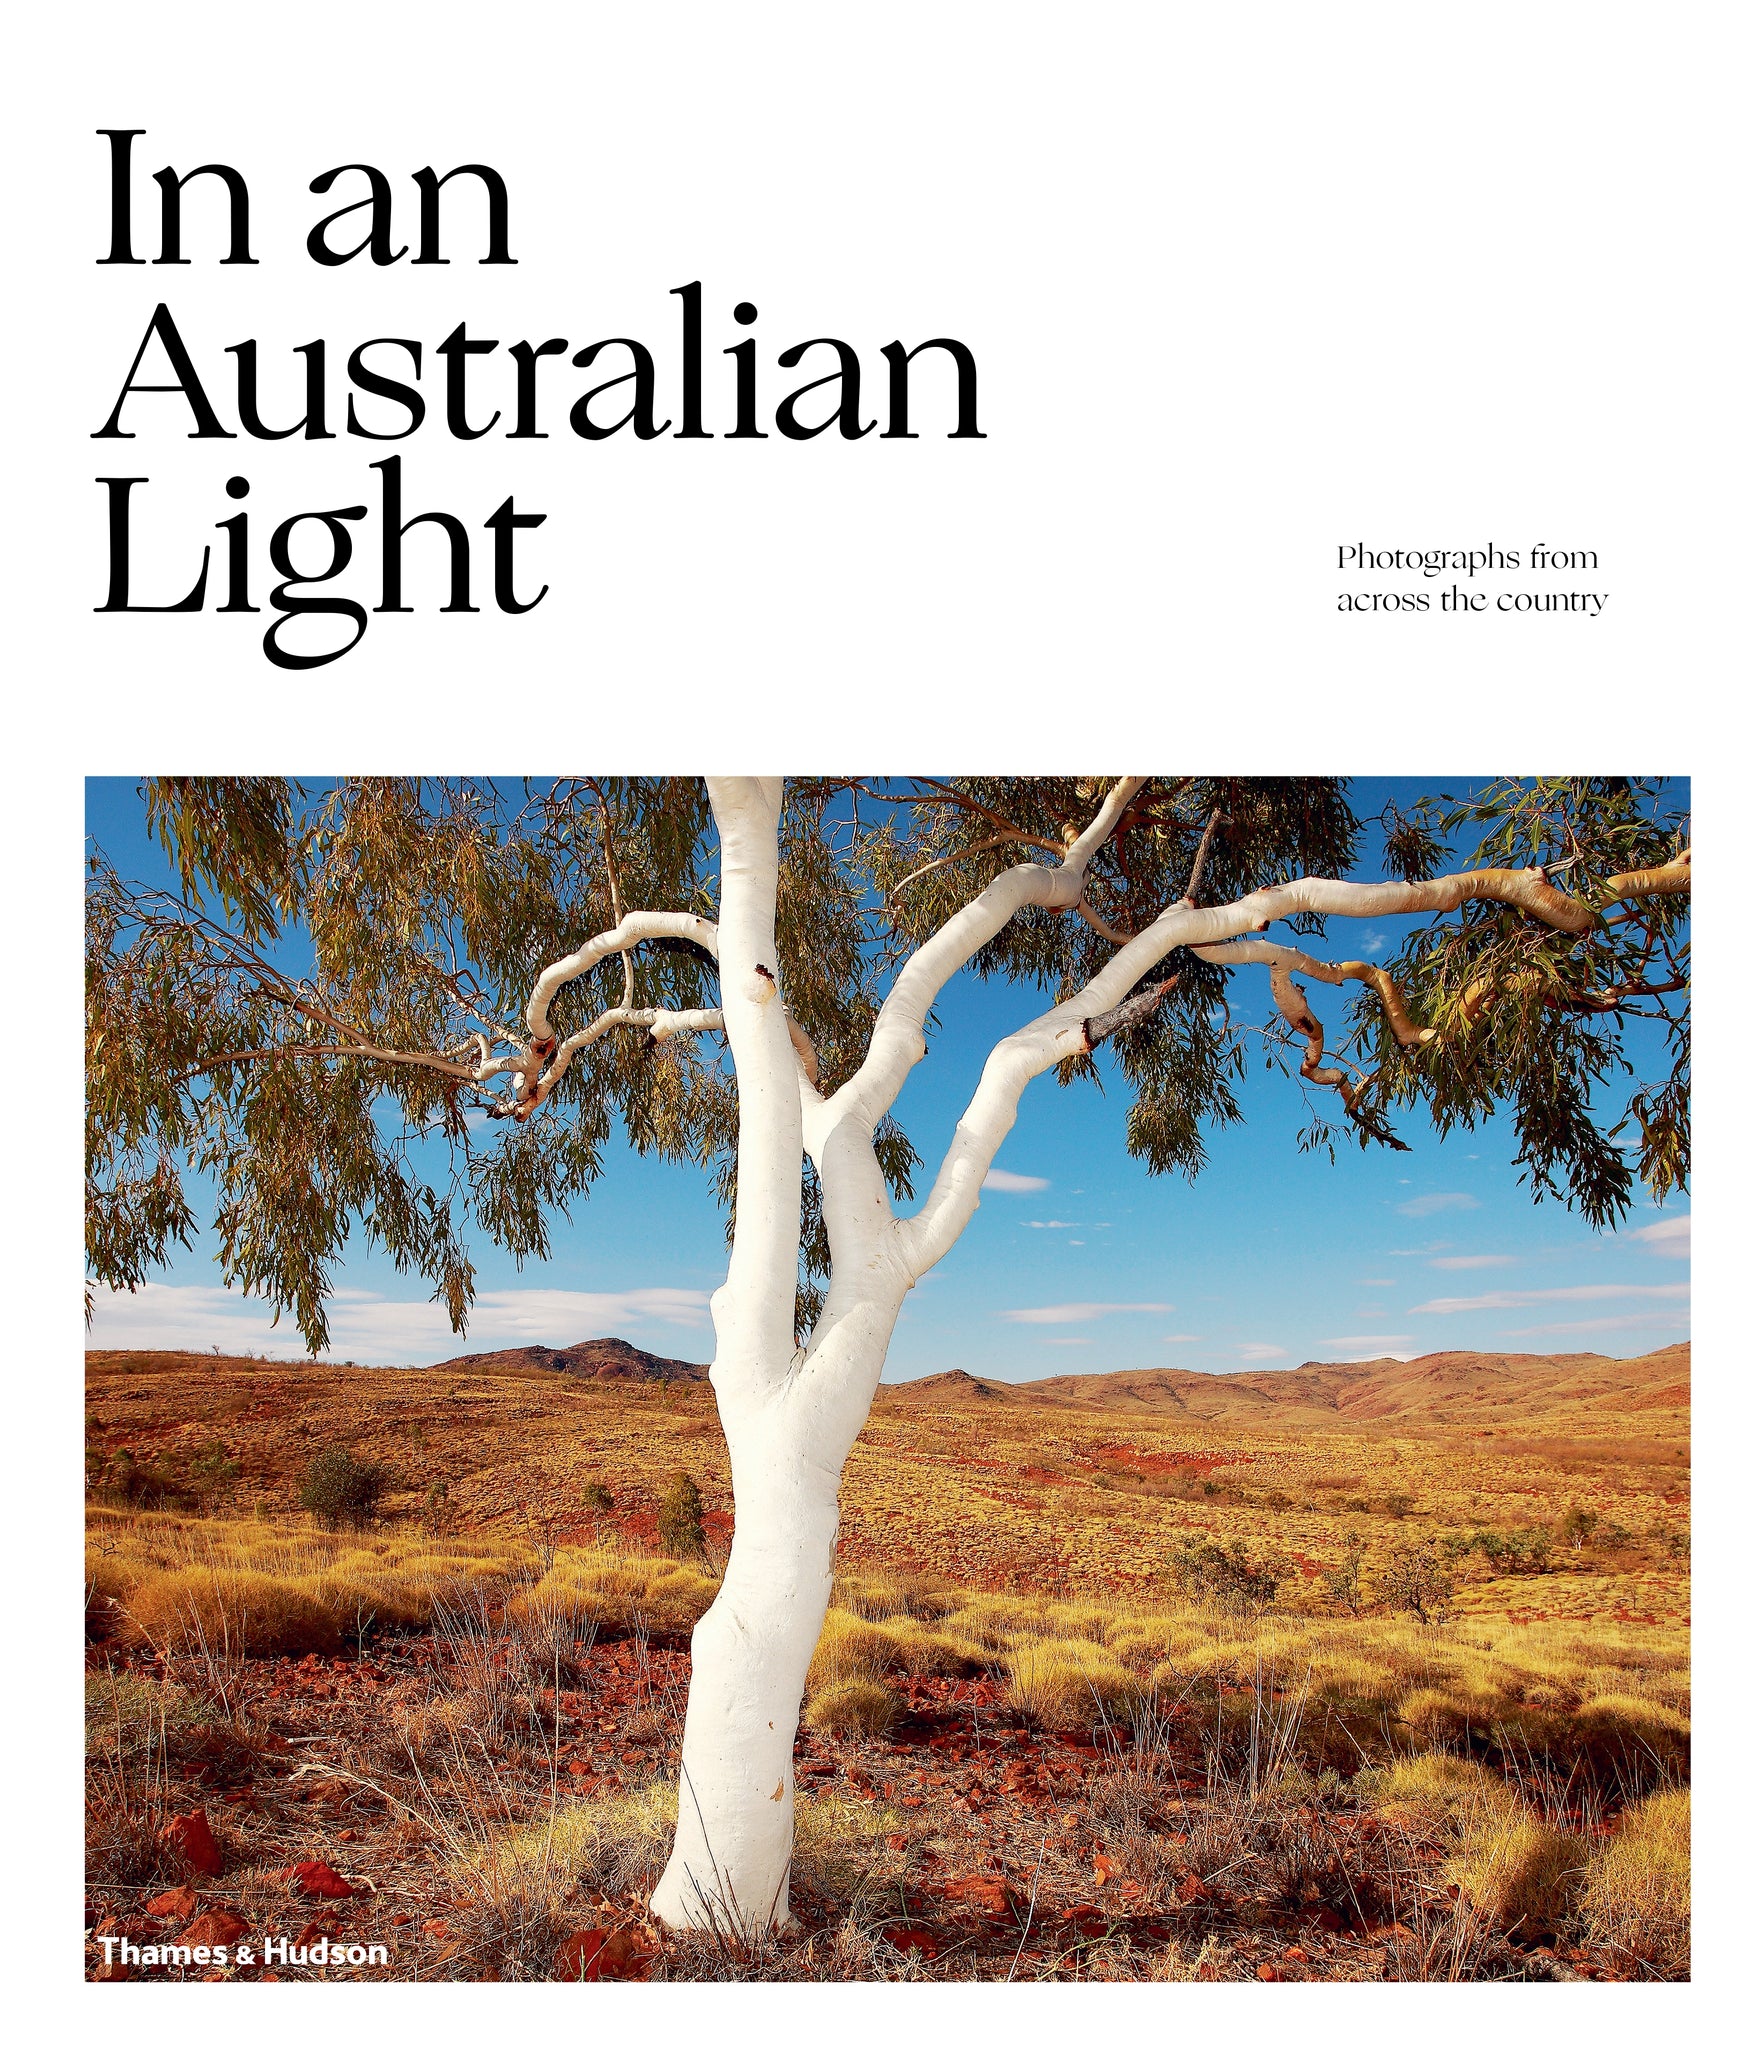 In an Australian Light: Photographs from Across the Country